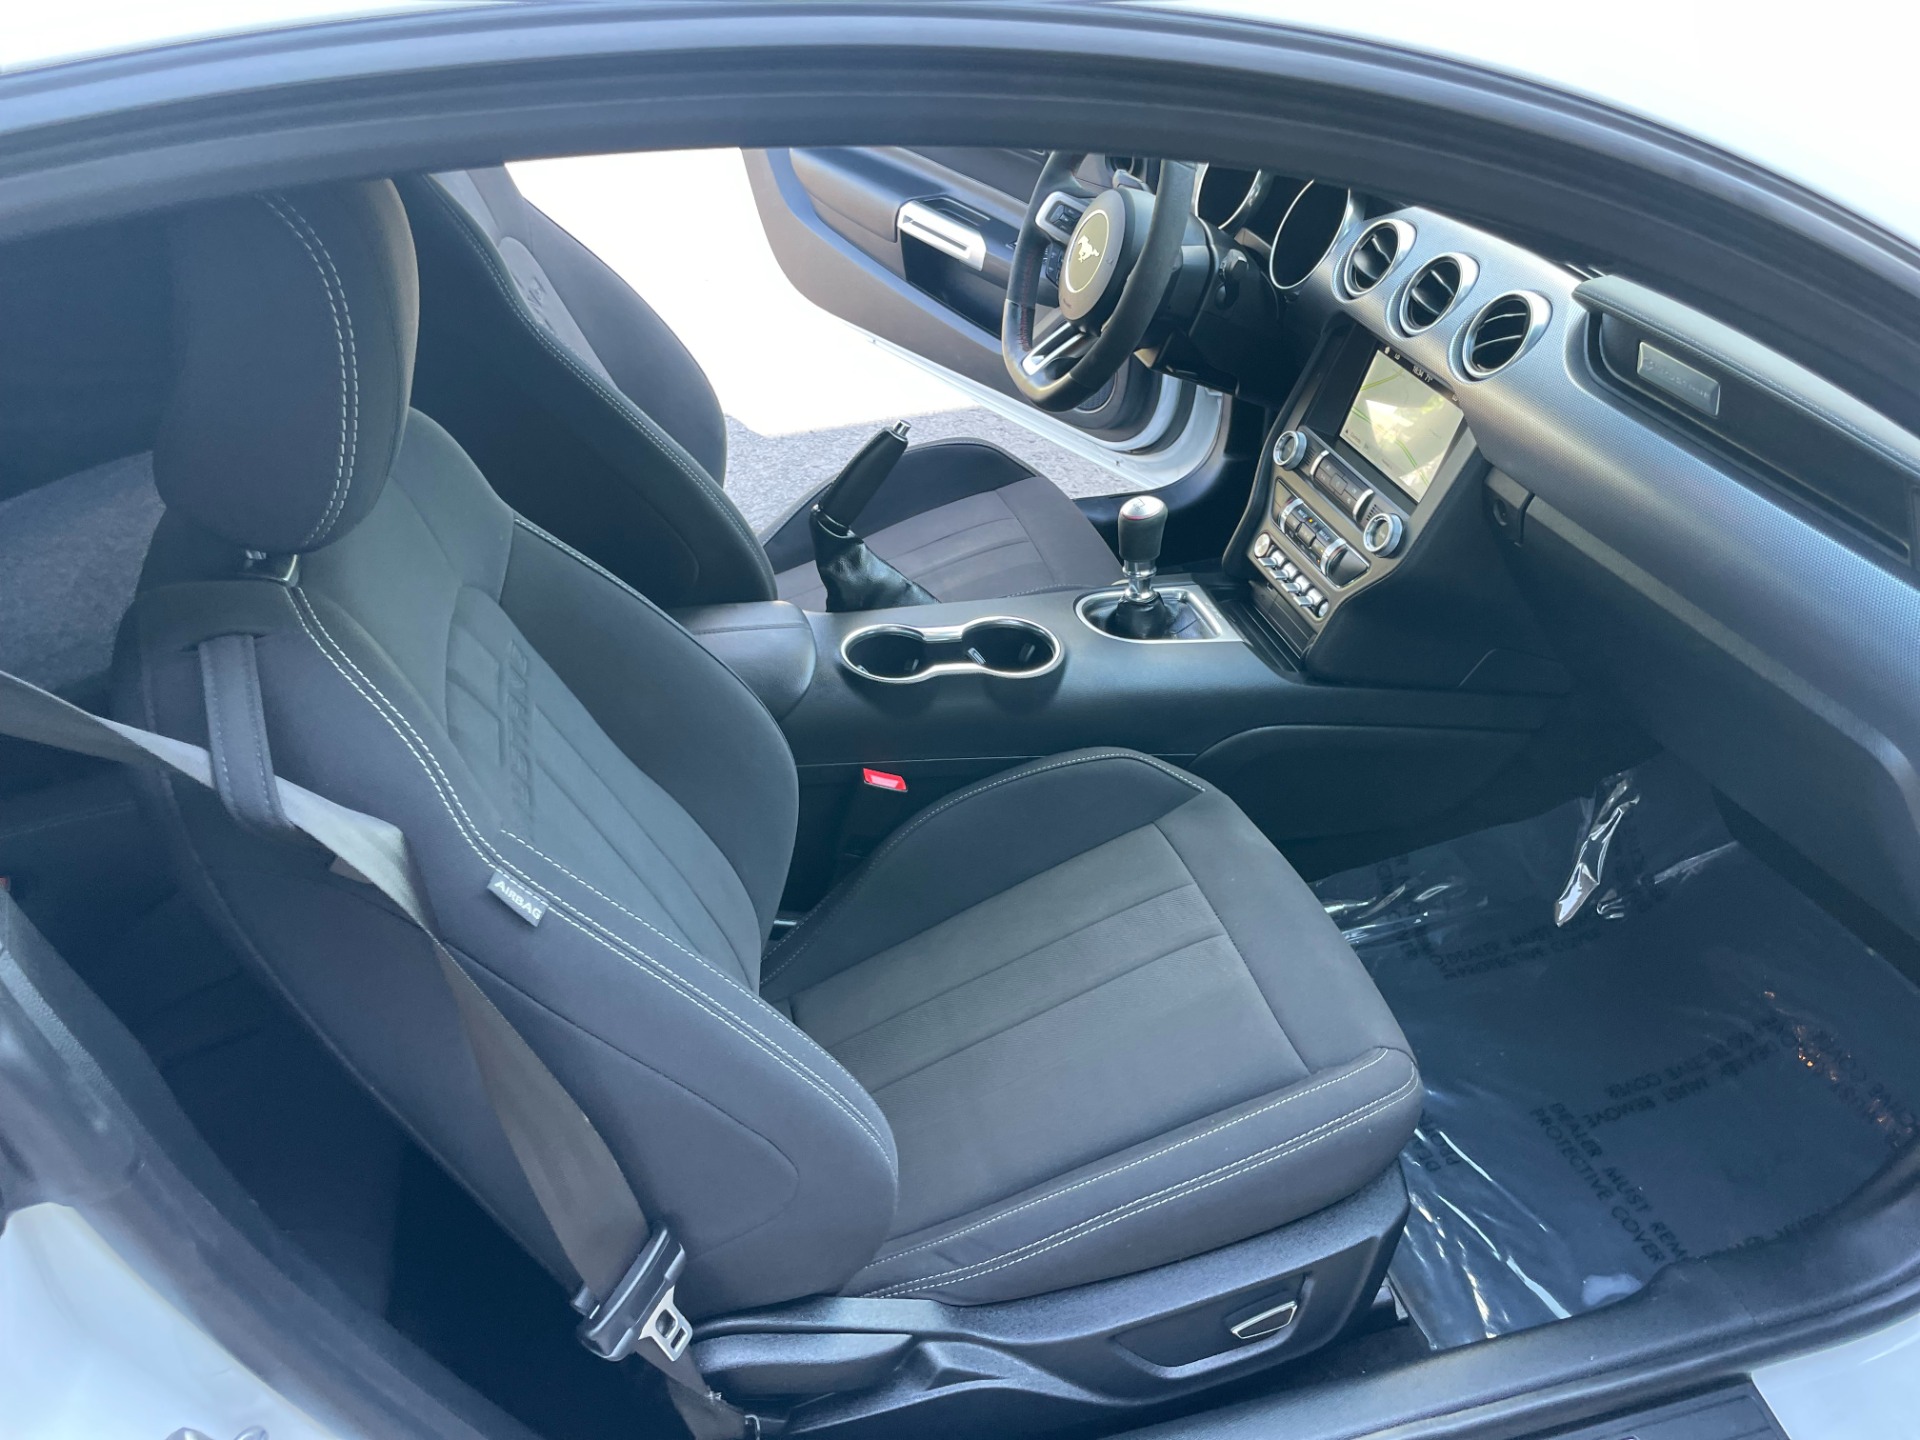 Hide N Seat Auto Interiors - Ford Focus RS Mk2 interior trimmed in black  leather with Cobalt Blue Alcantara.